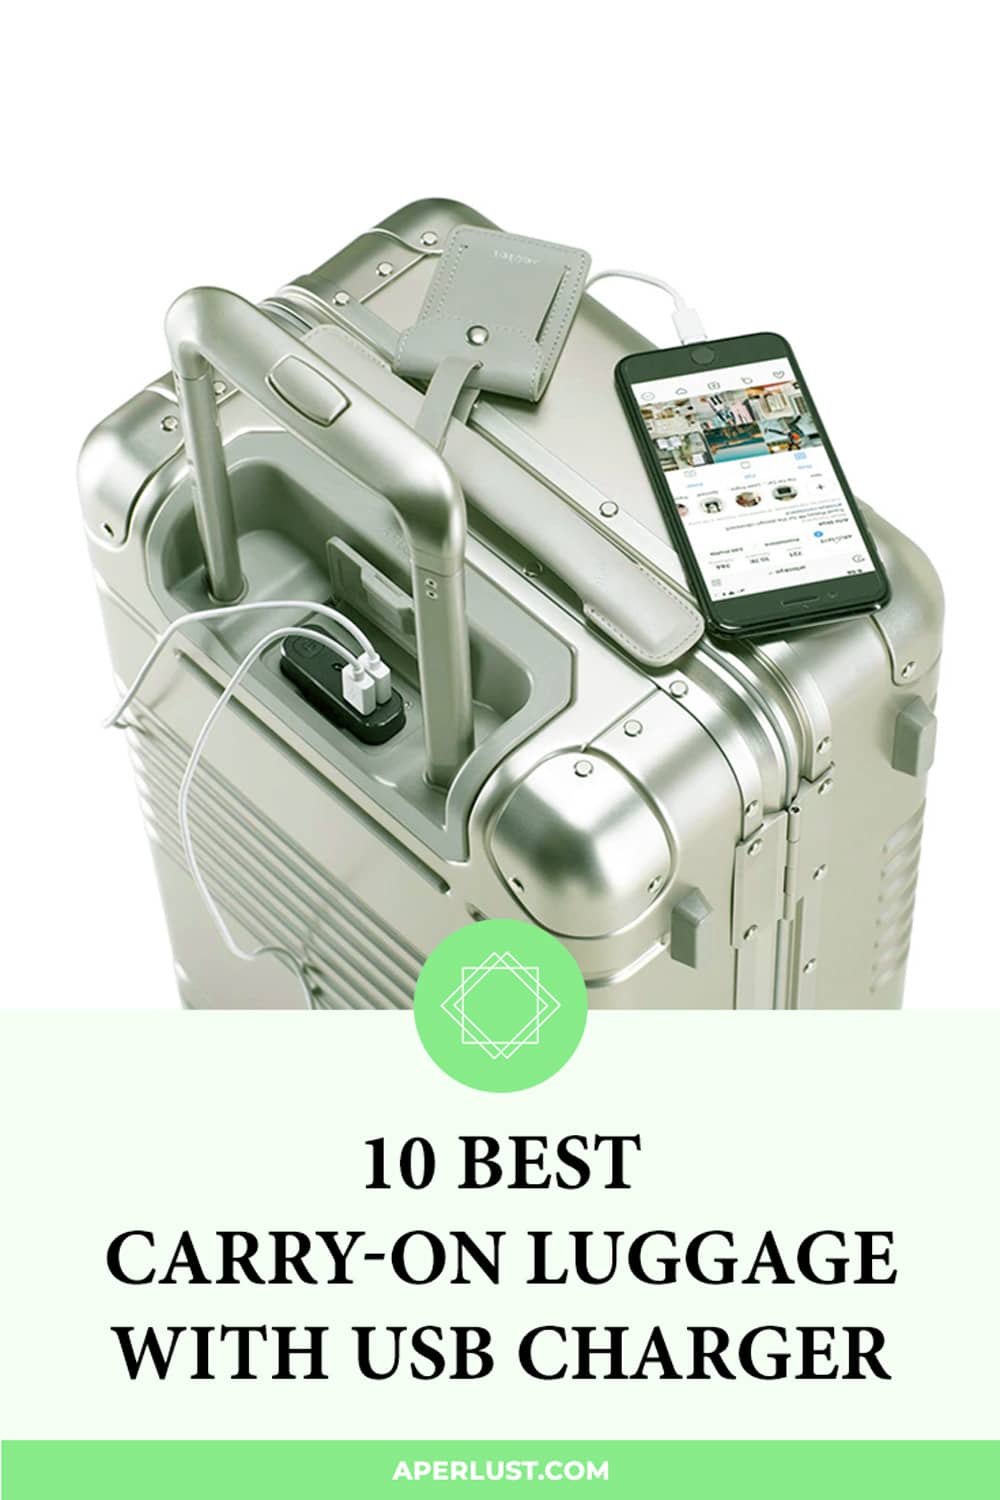 10 best carry-on luggage with usb charger pinterest pin